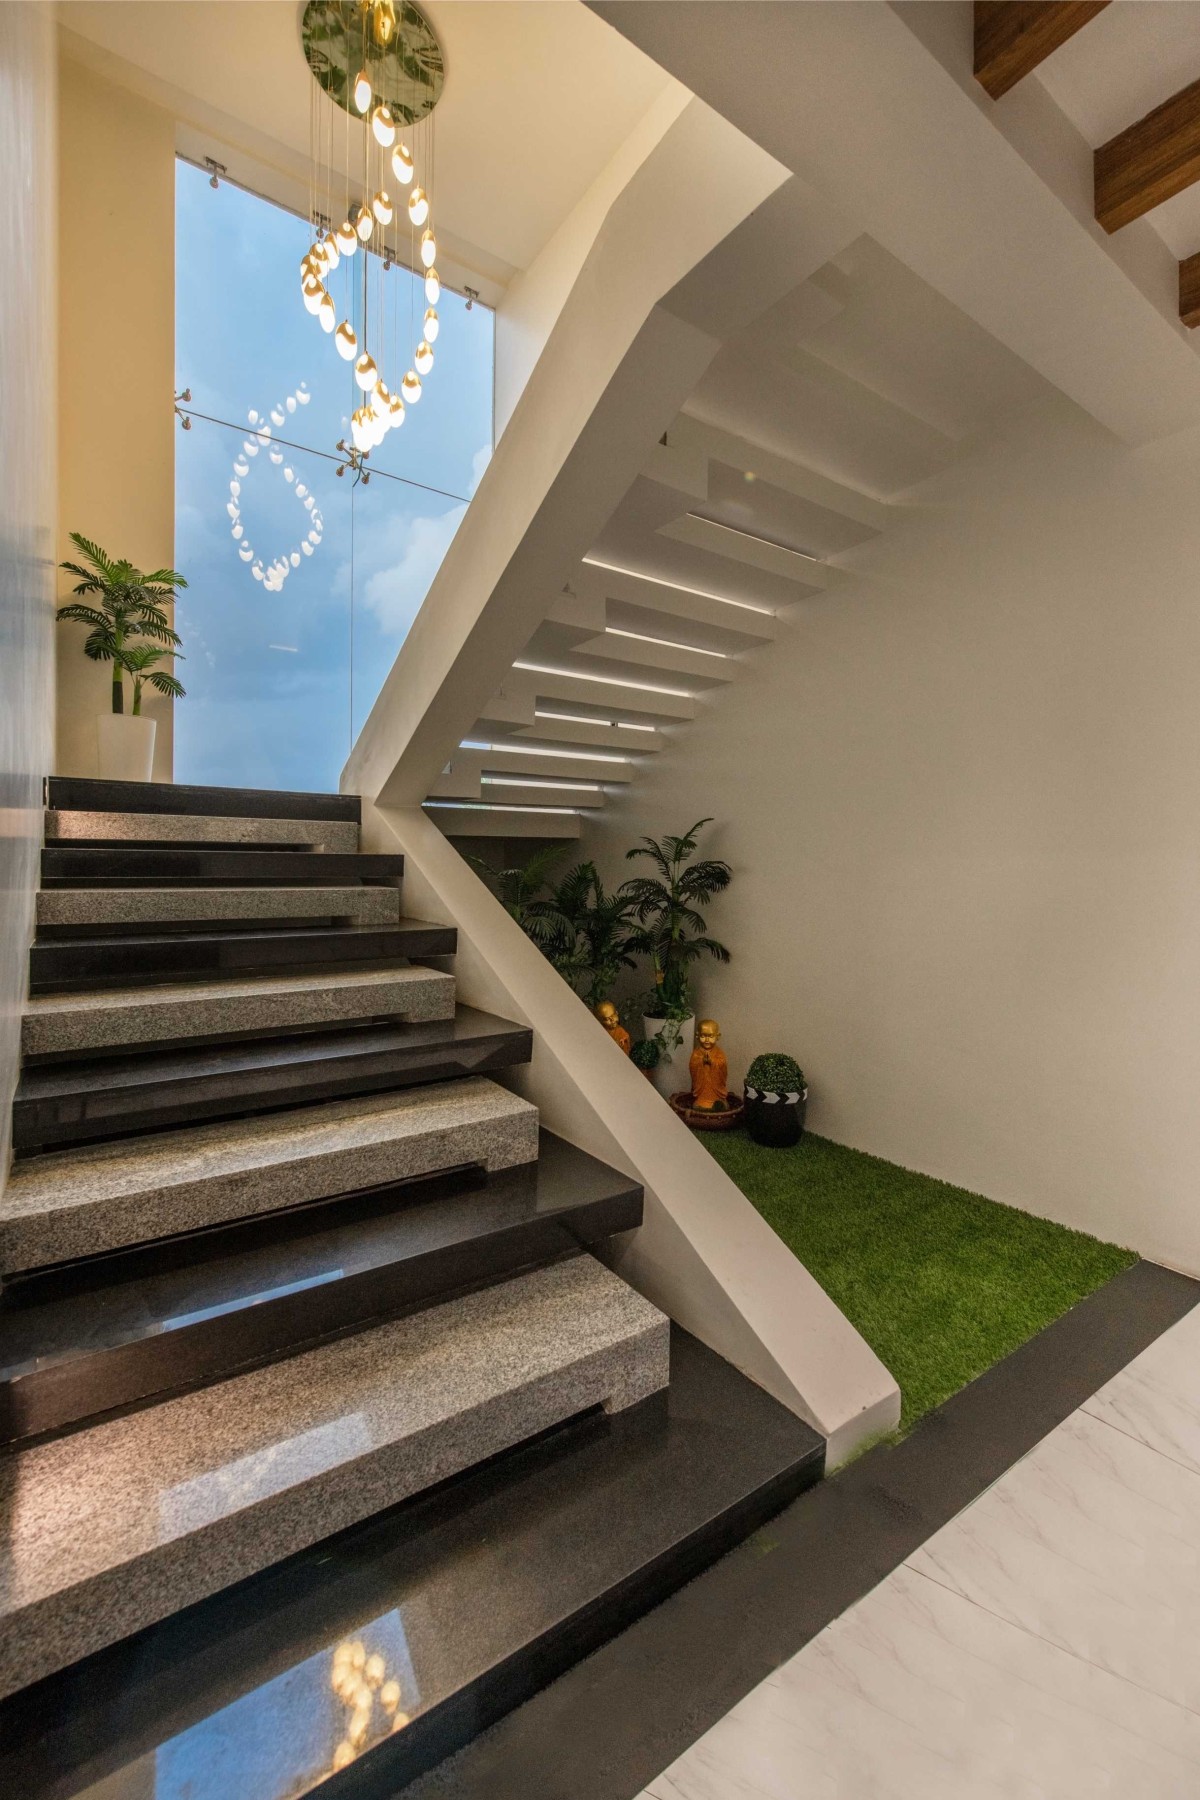 Staircase of The Tropical Beach House by Inventarchitects